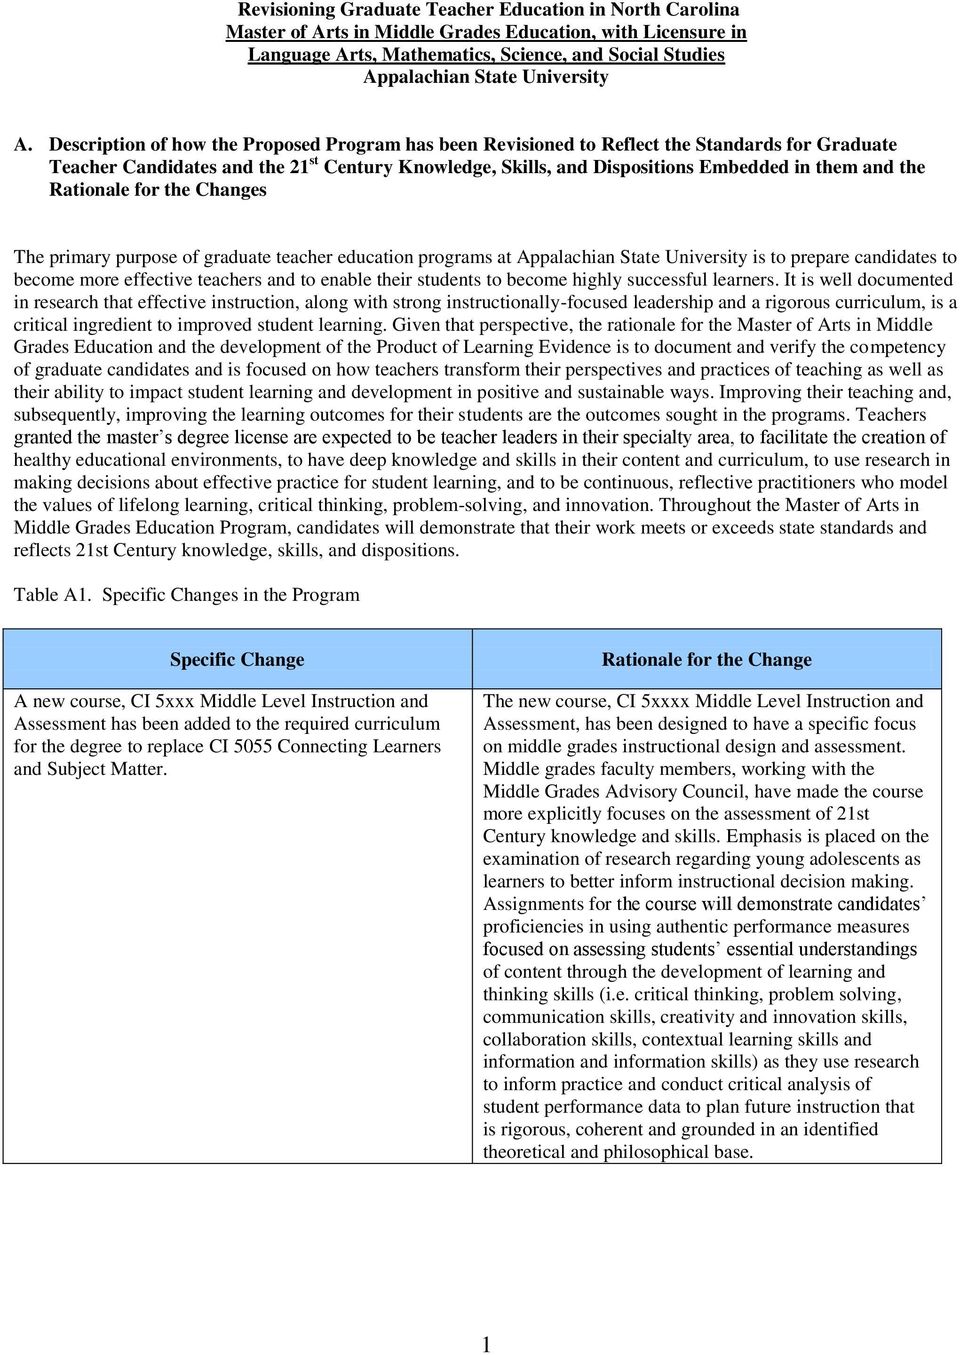 Description of how the Proposed Program has been Revisioned to Reflect the Standards for Graduate Teacher Candidates and the 21 st Century Knowledge, Skills, and Dispositions Embedded in them and the